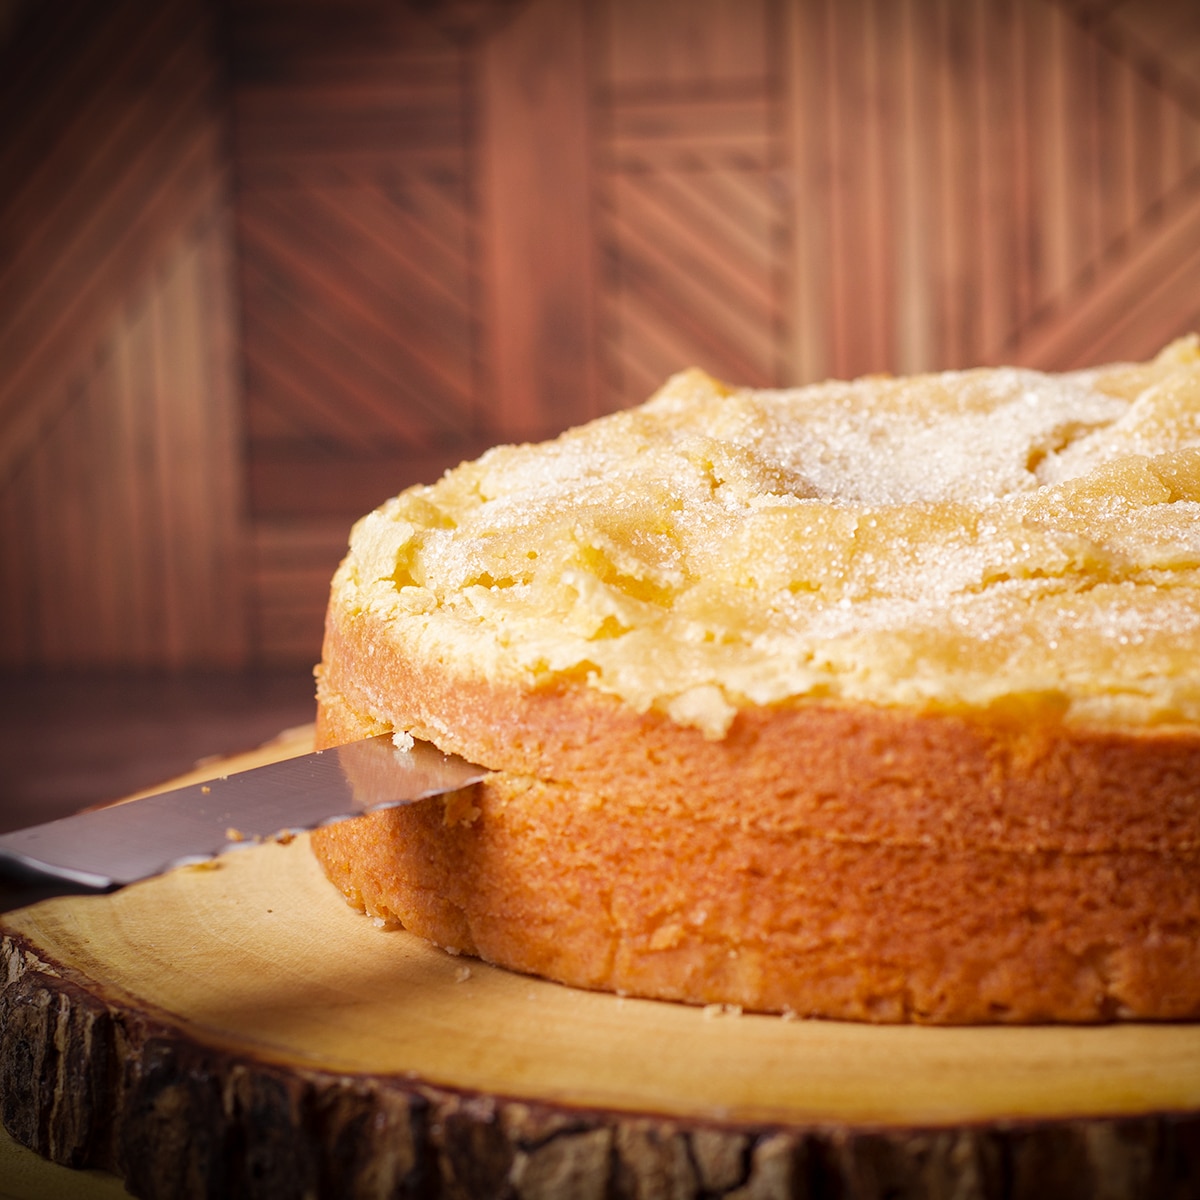 Someone using a serrated knife to cut an olive oil cake in half so it can be filled with mascarpone pastry cream.